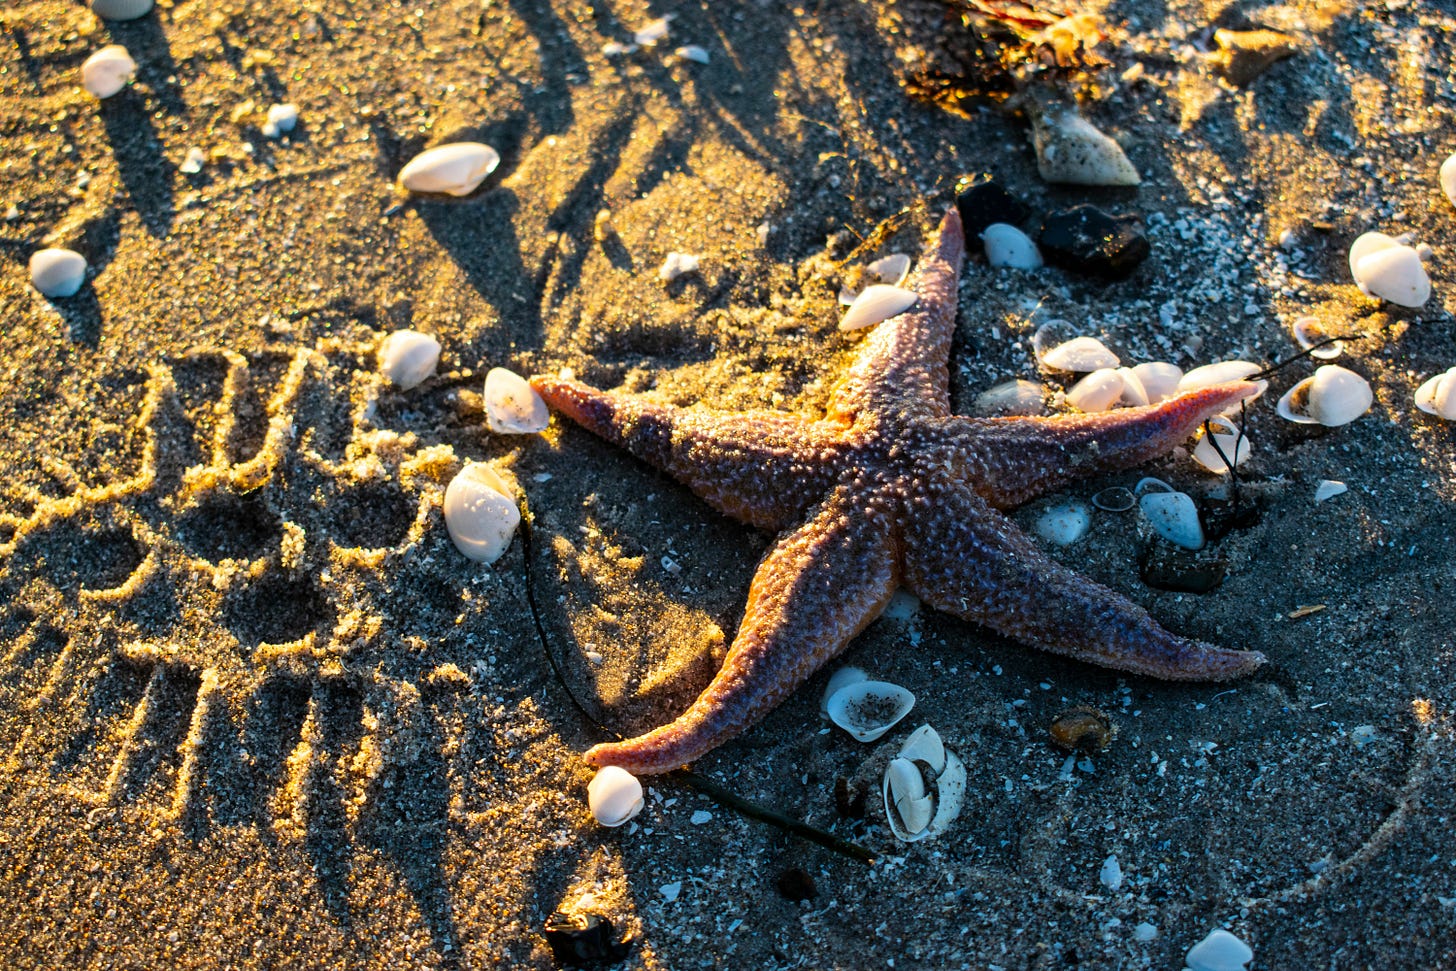 Photo of a reddish starfish on a brown sand beach, near a boot print and surrounded by small seashells